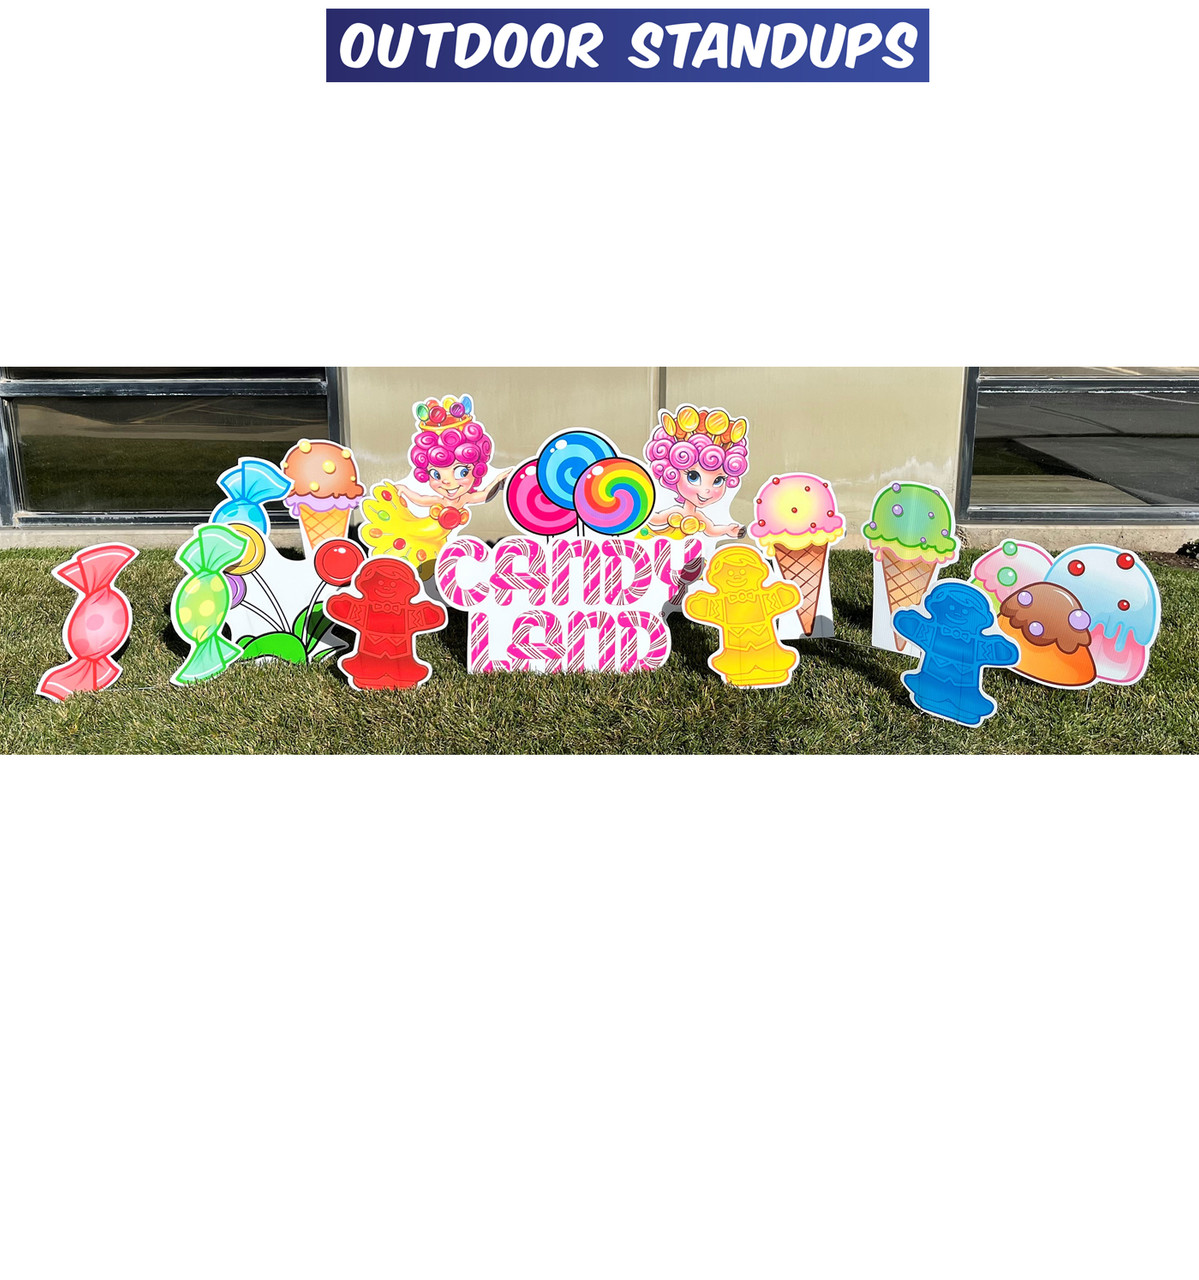 Outdoor coroplast yard signs of Candy Land from Hasbro.